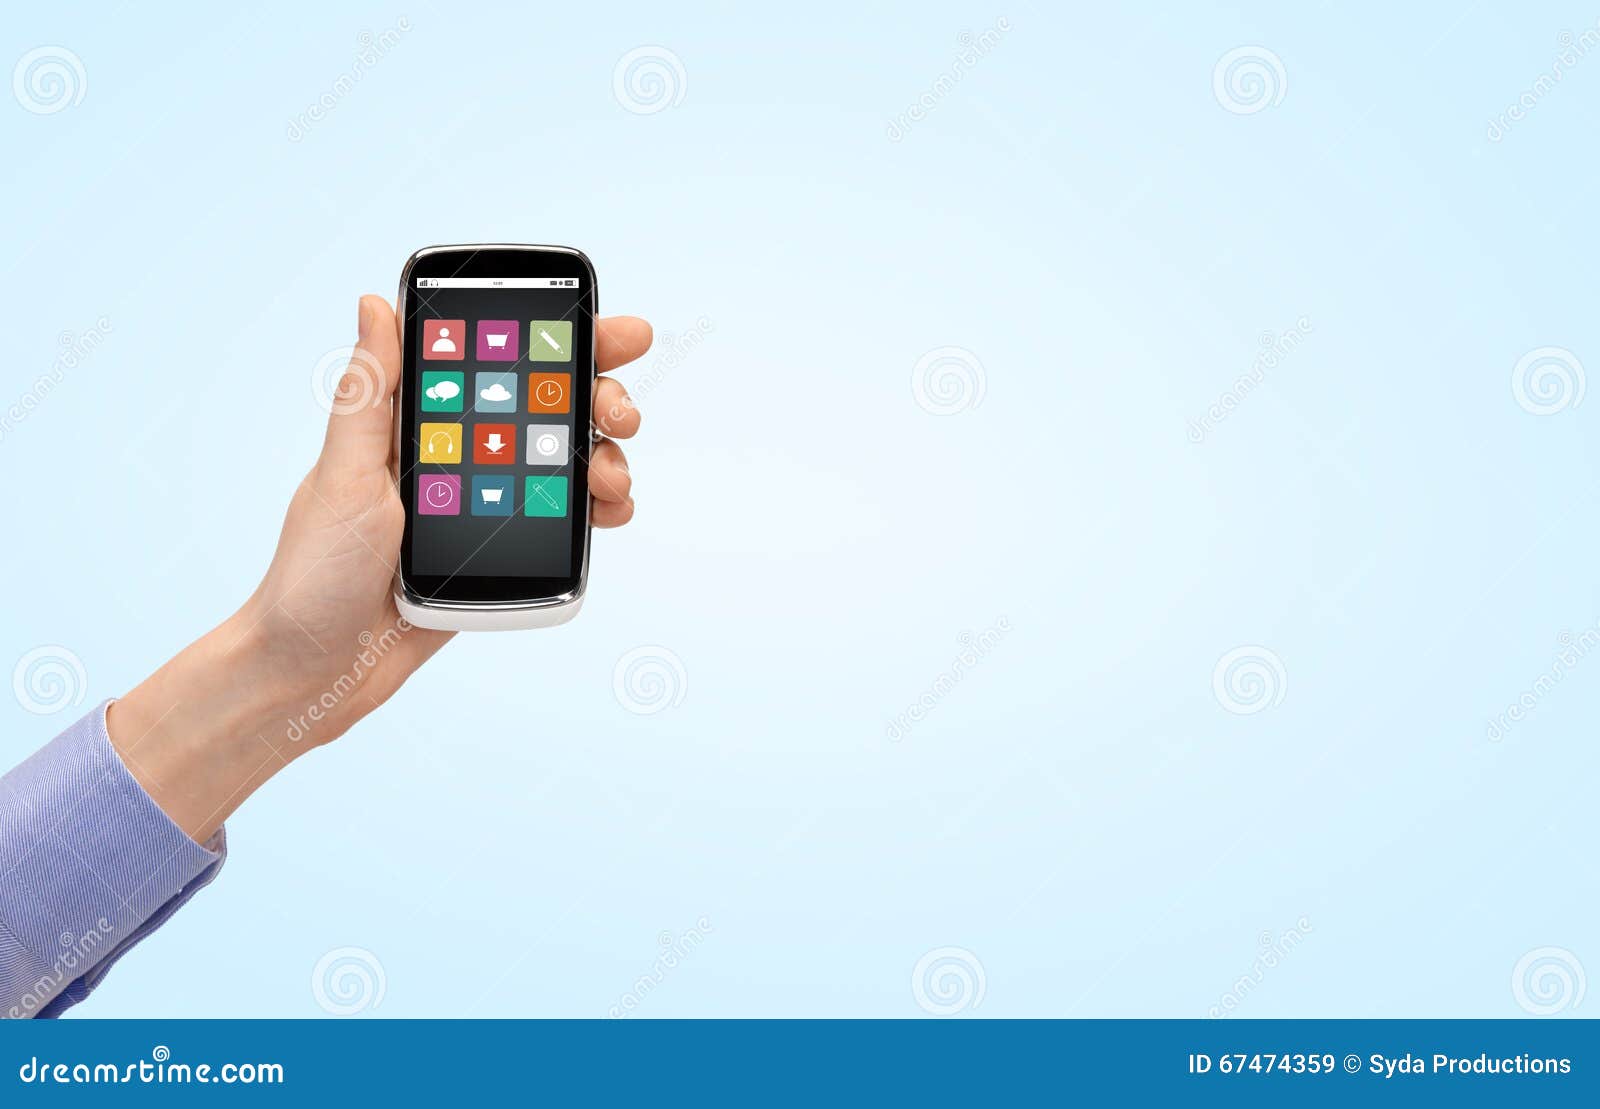 Close Up of Hand with Smartphone Menu Icons Stock Image - Image of ...